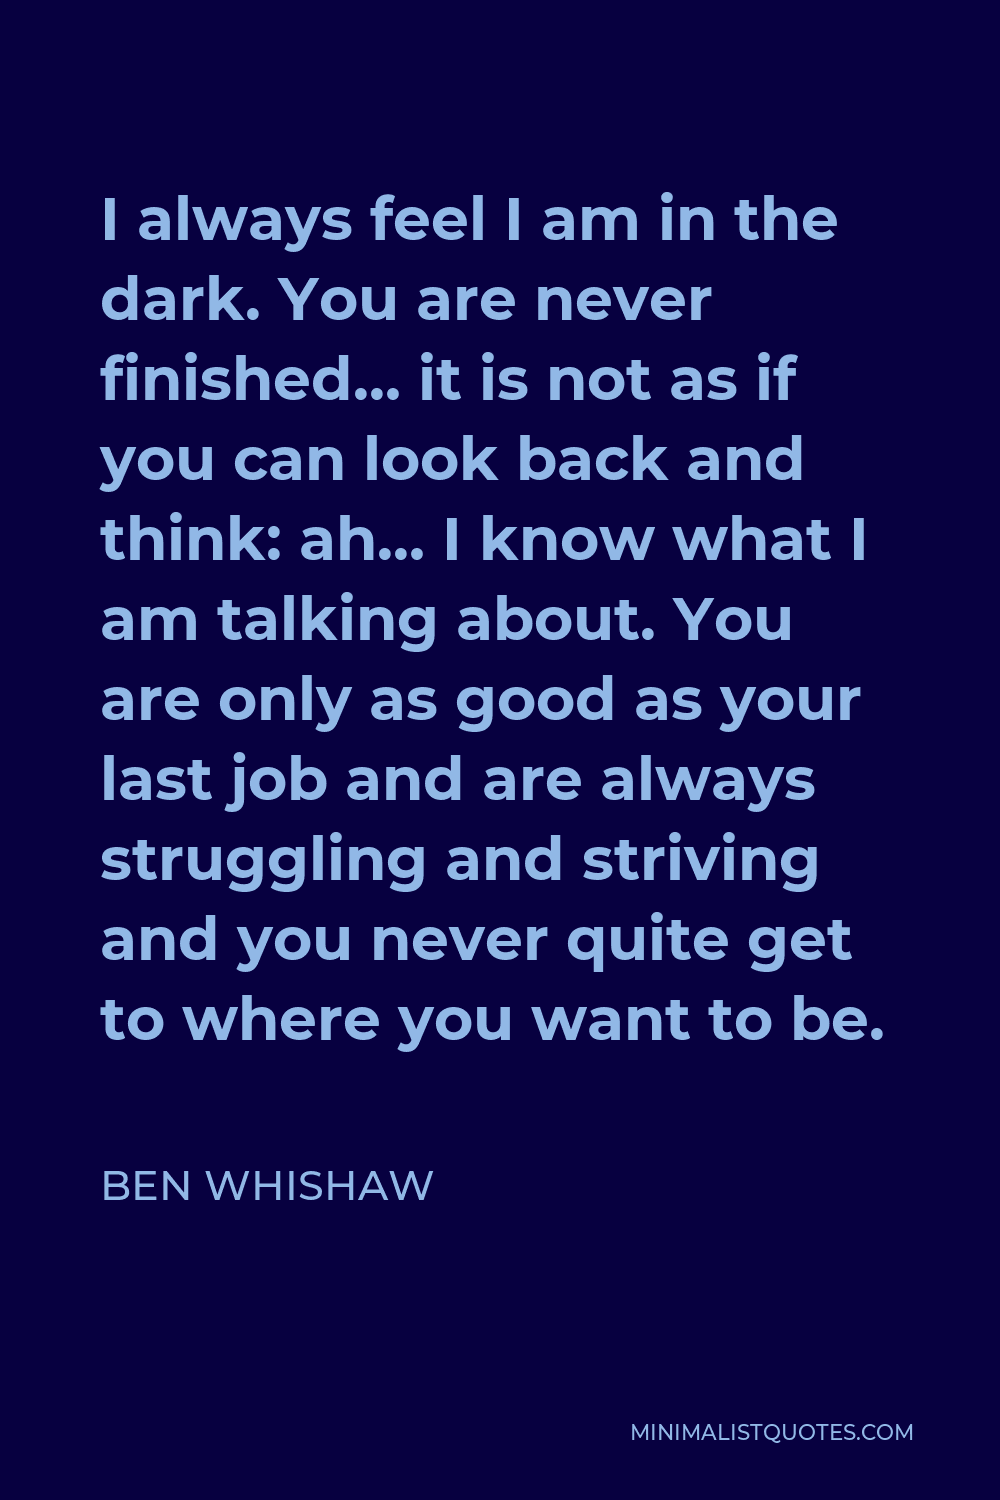 Ben Whishaw Quote - I always feel I am in the dark. You are never finished… it is not as if you can look back and think: ah… I know what I am talking about. You are only as good as your last job and are always struggling and striving and you never quite get to where you want to be.